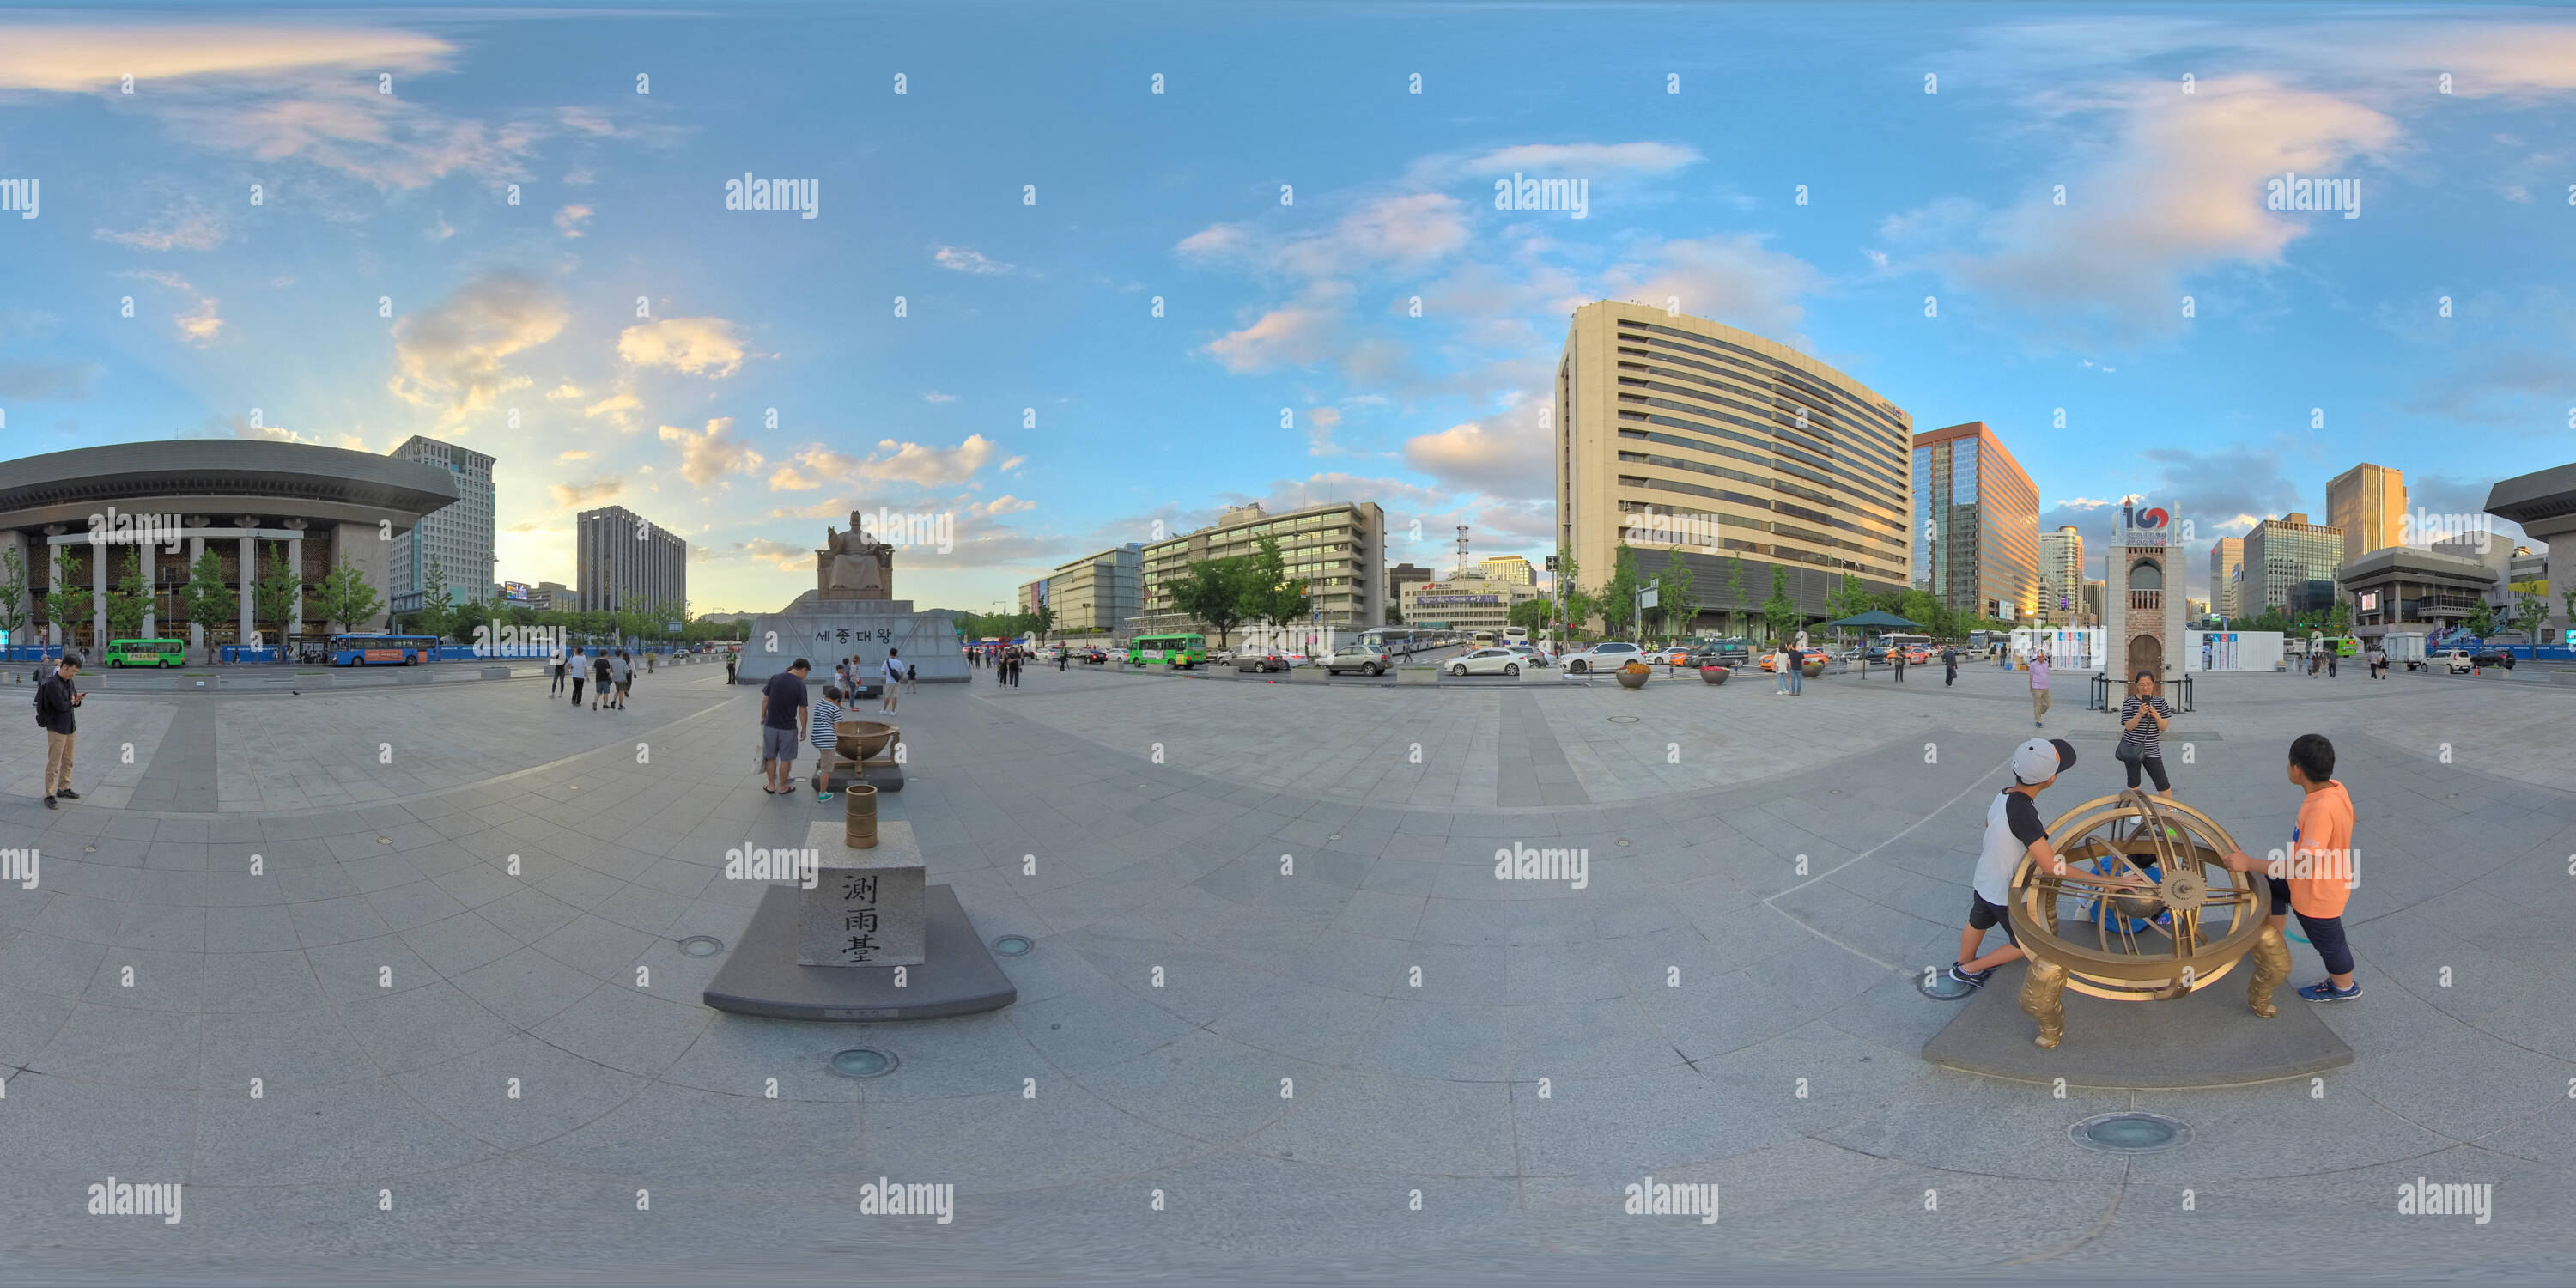 360 degree panoramic view of Seoul, South Korea - 22 June 2019 360 degrees panorama view of Gyeongbokgung Palace and City Center.